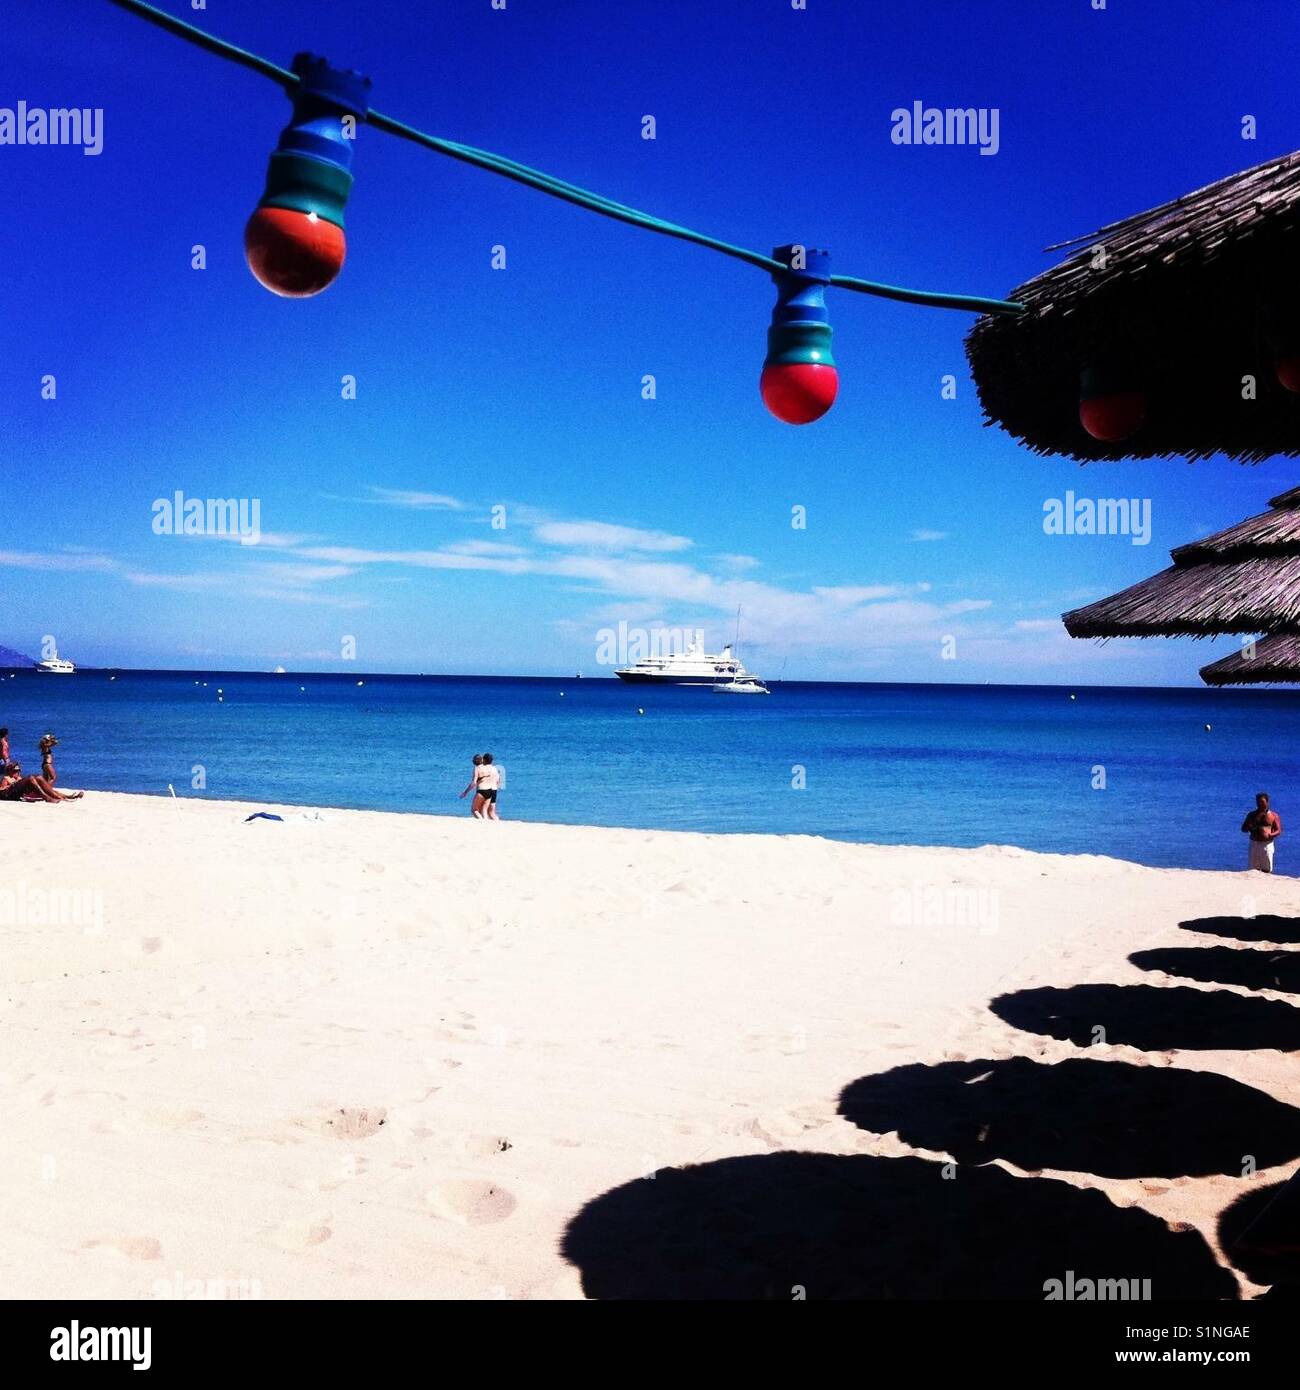 Albums 93+ Images pampelonne ramatuelle beach 10 year old beach alamy stock photo Updated